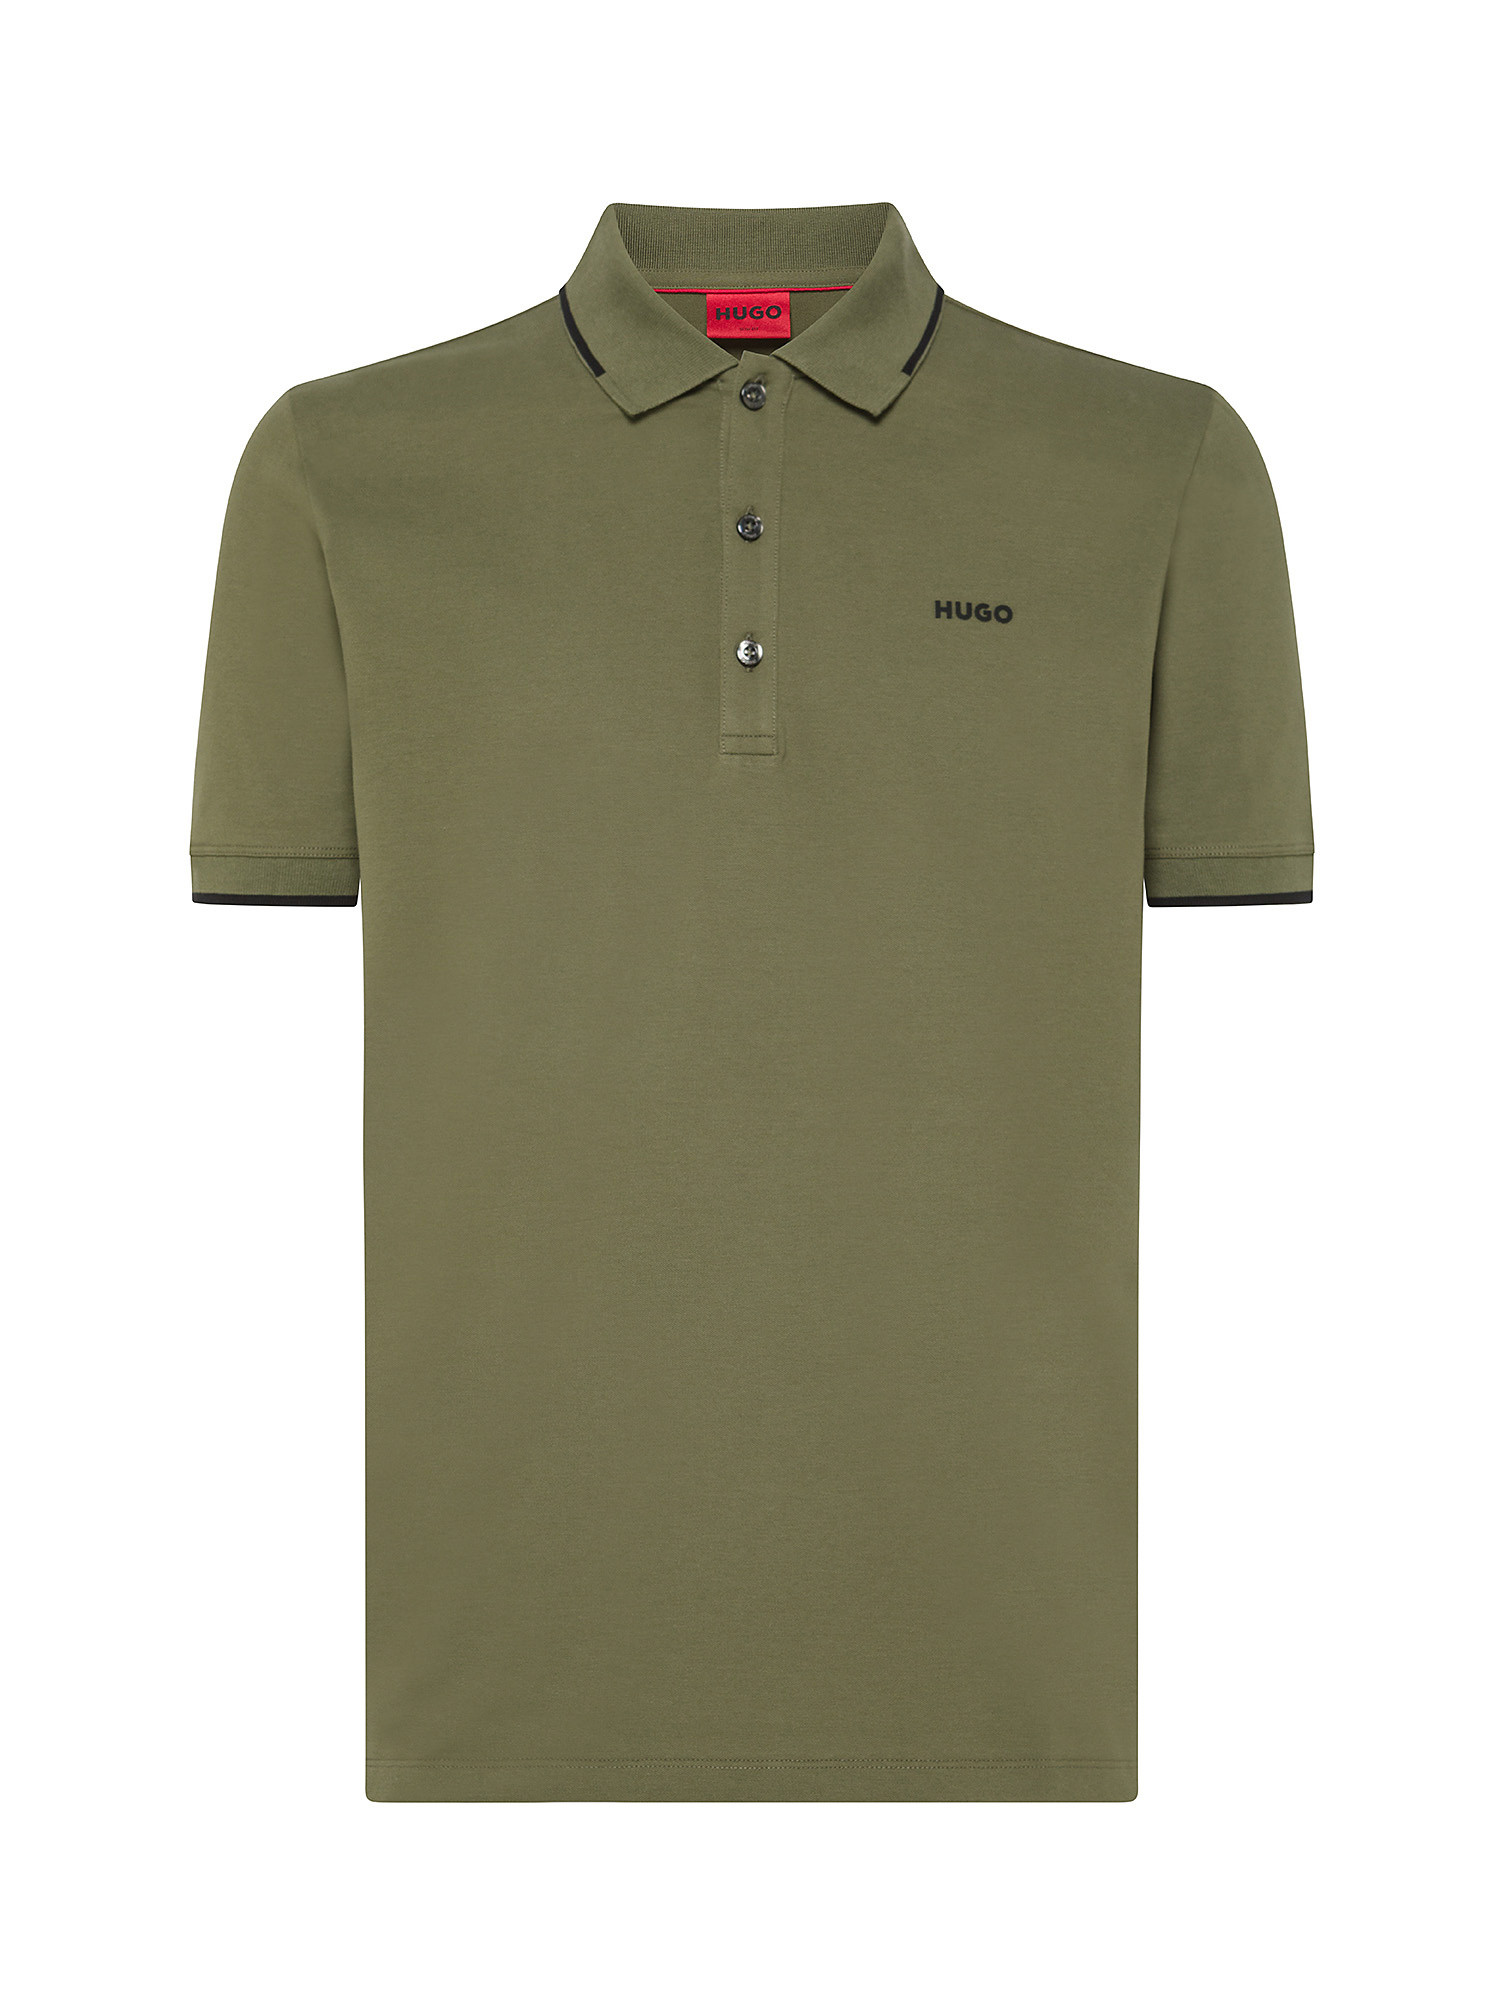 Hugo - Polo slim fit con logo in cotone, Verde, large image number 0